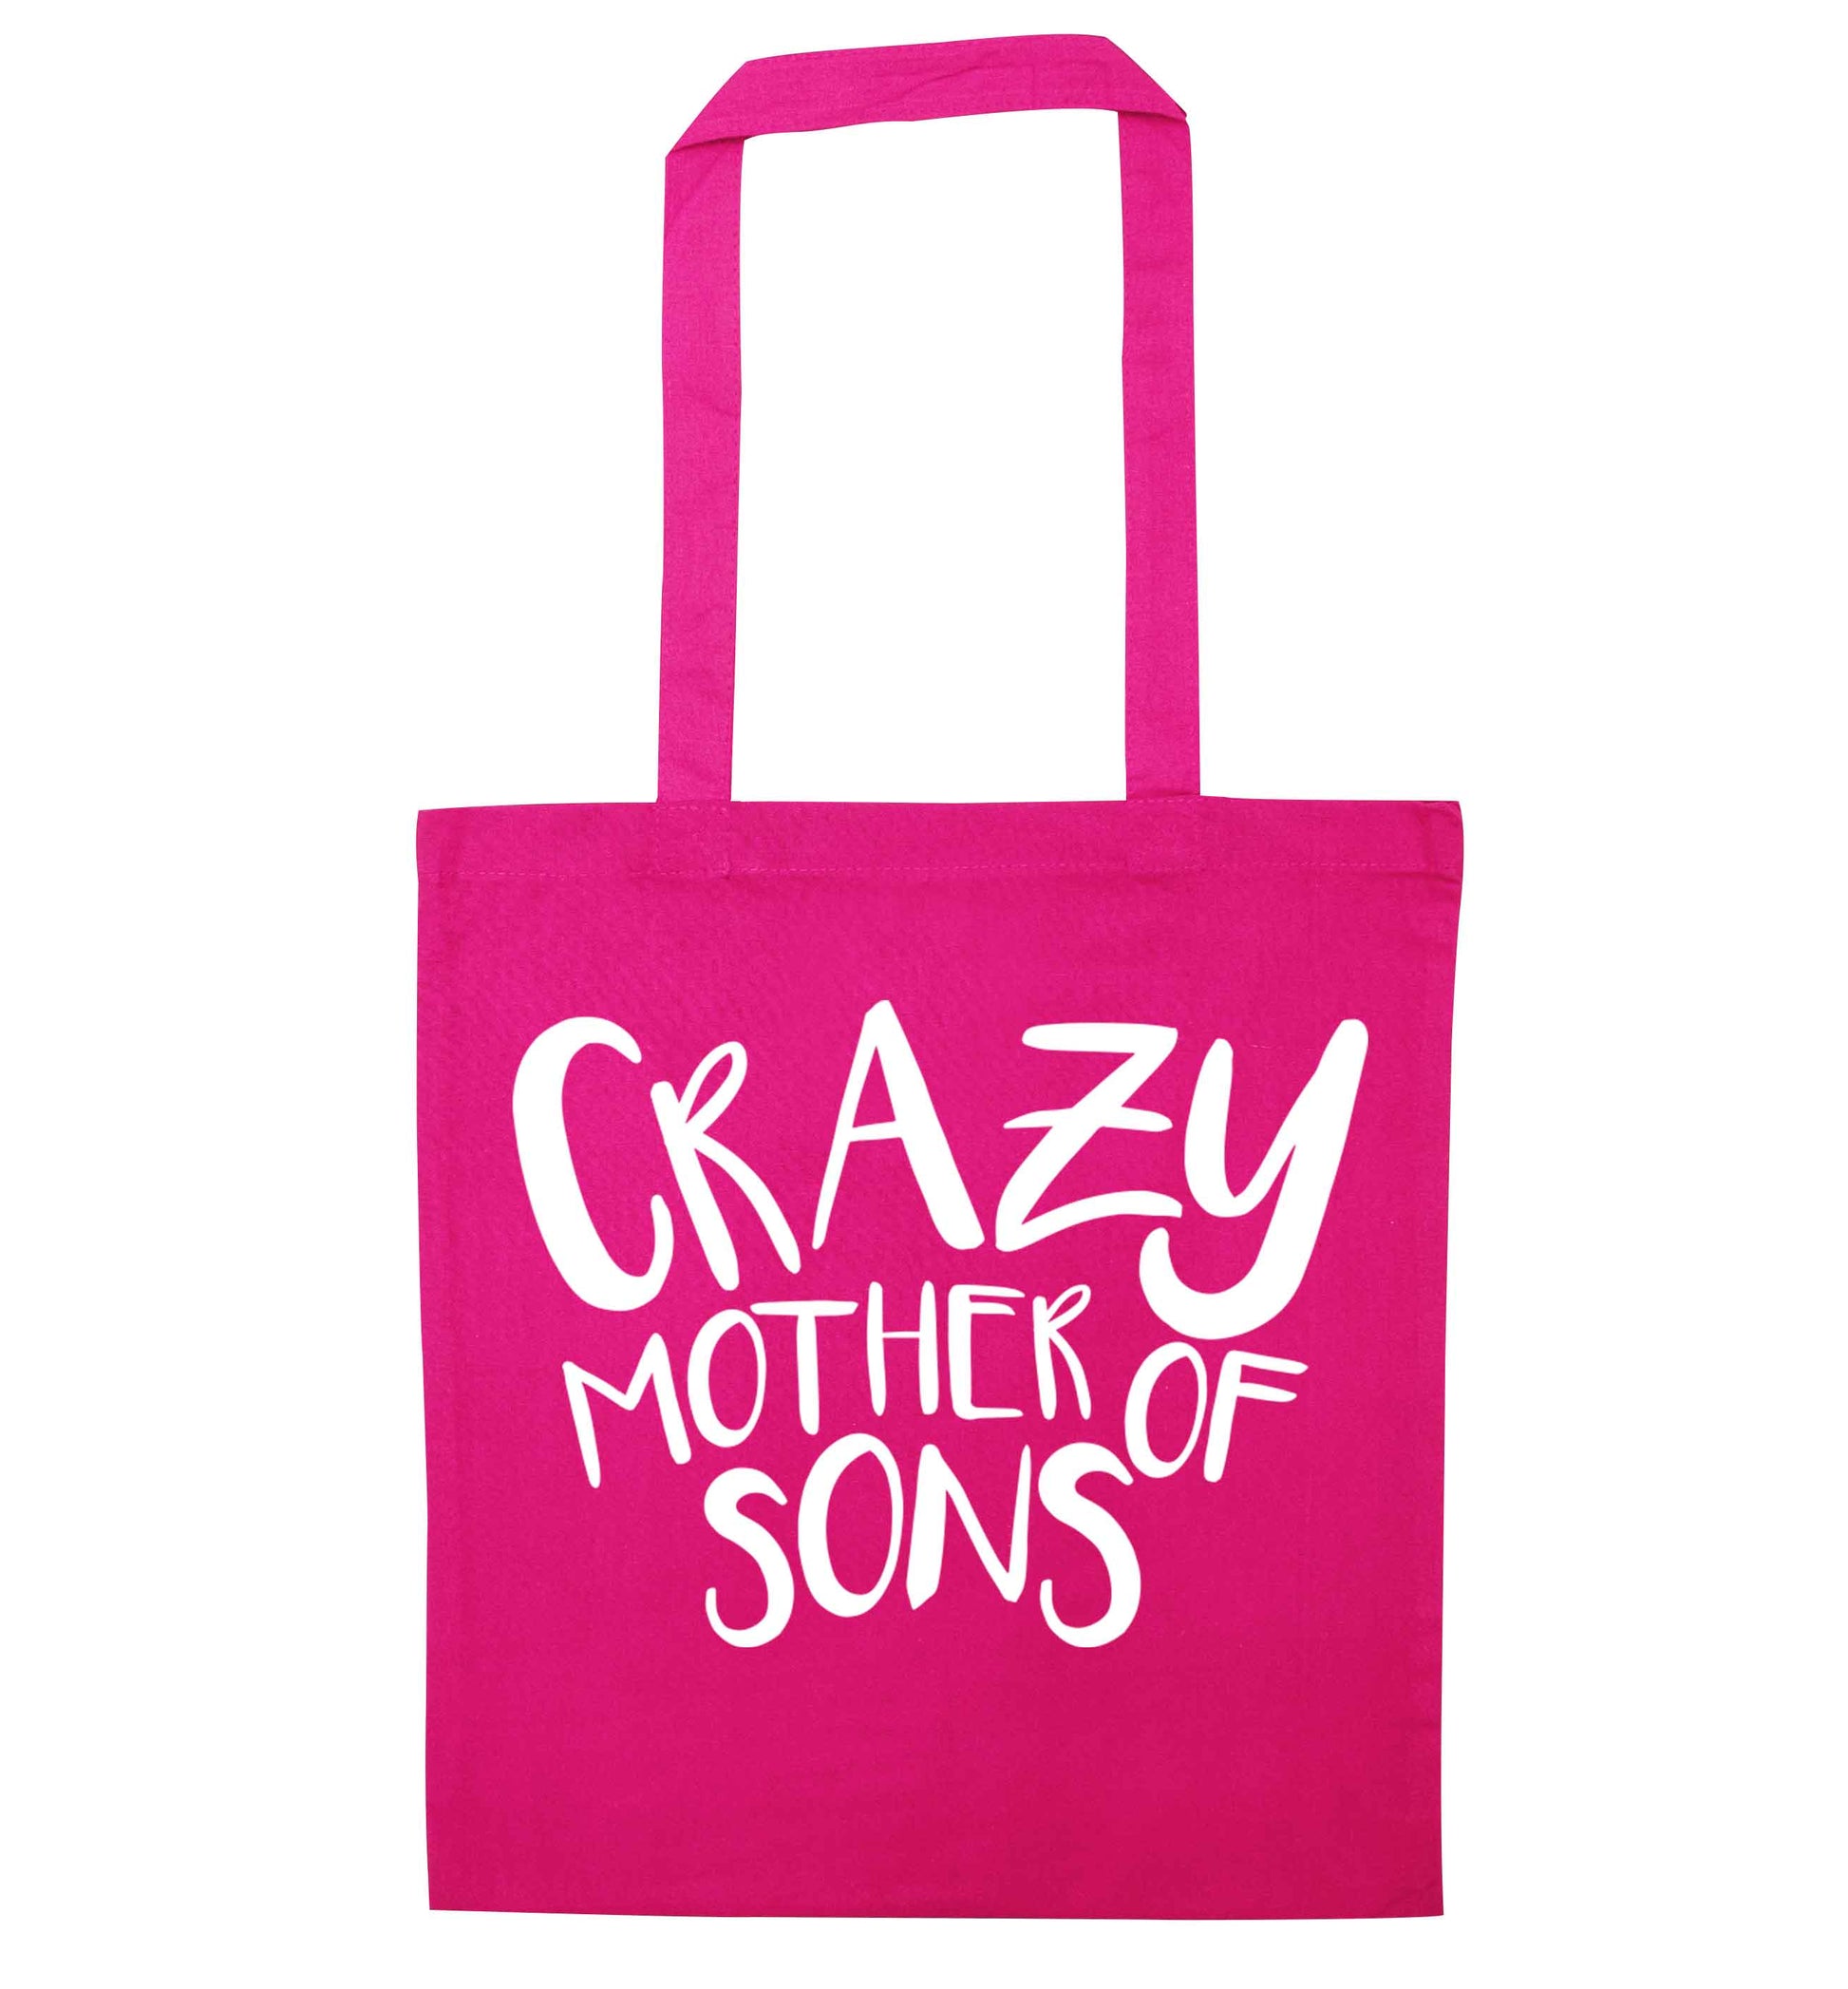 Crazy mother of sons pink tote bag